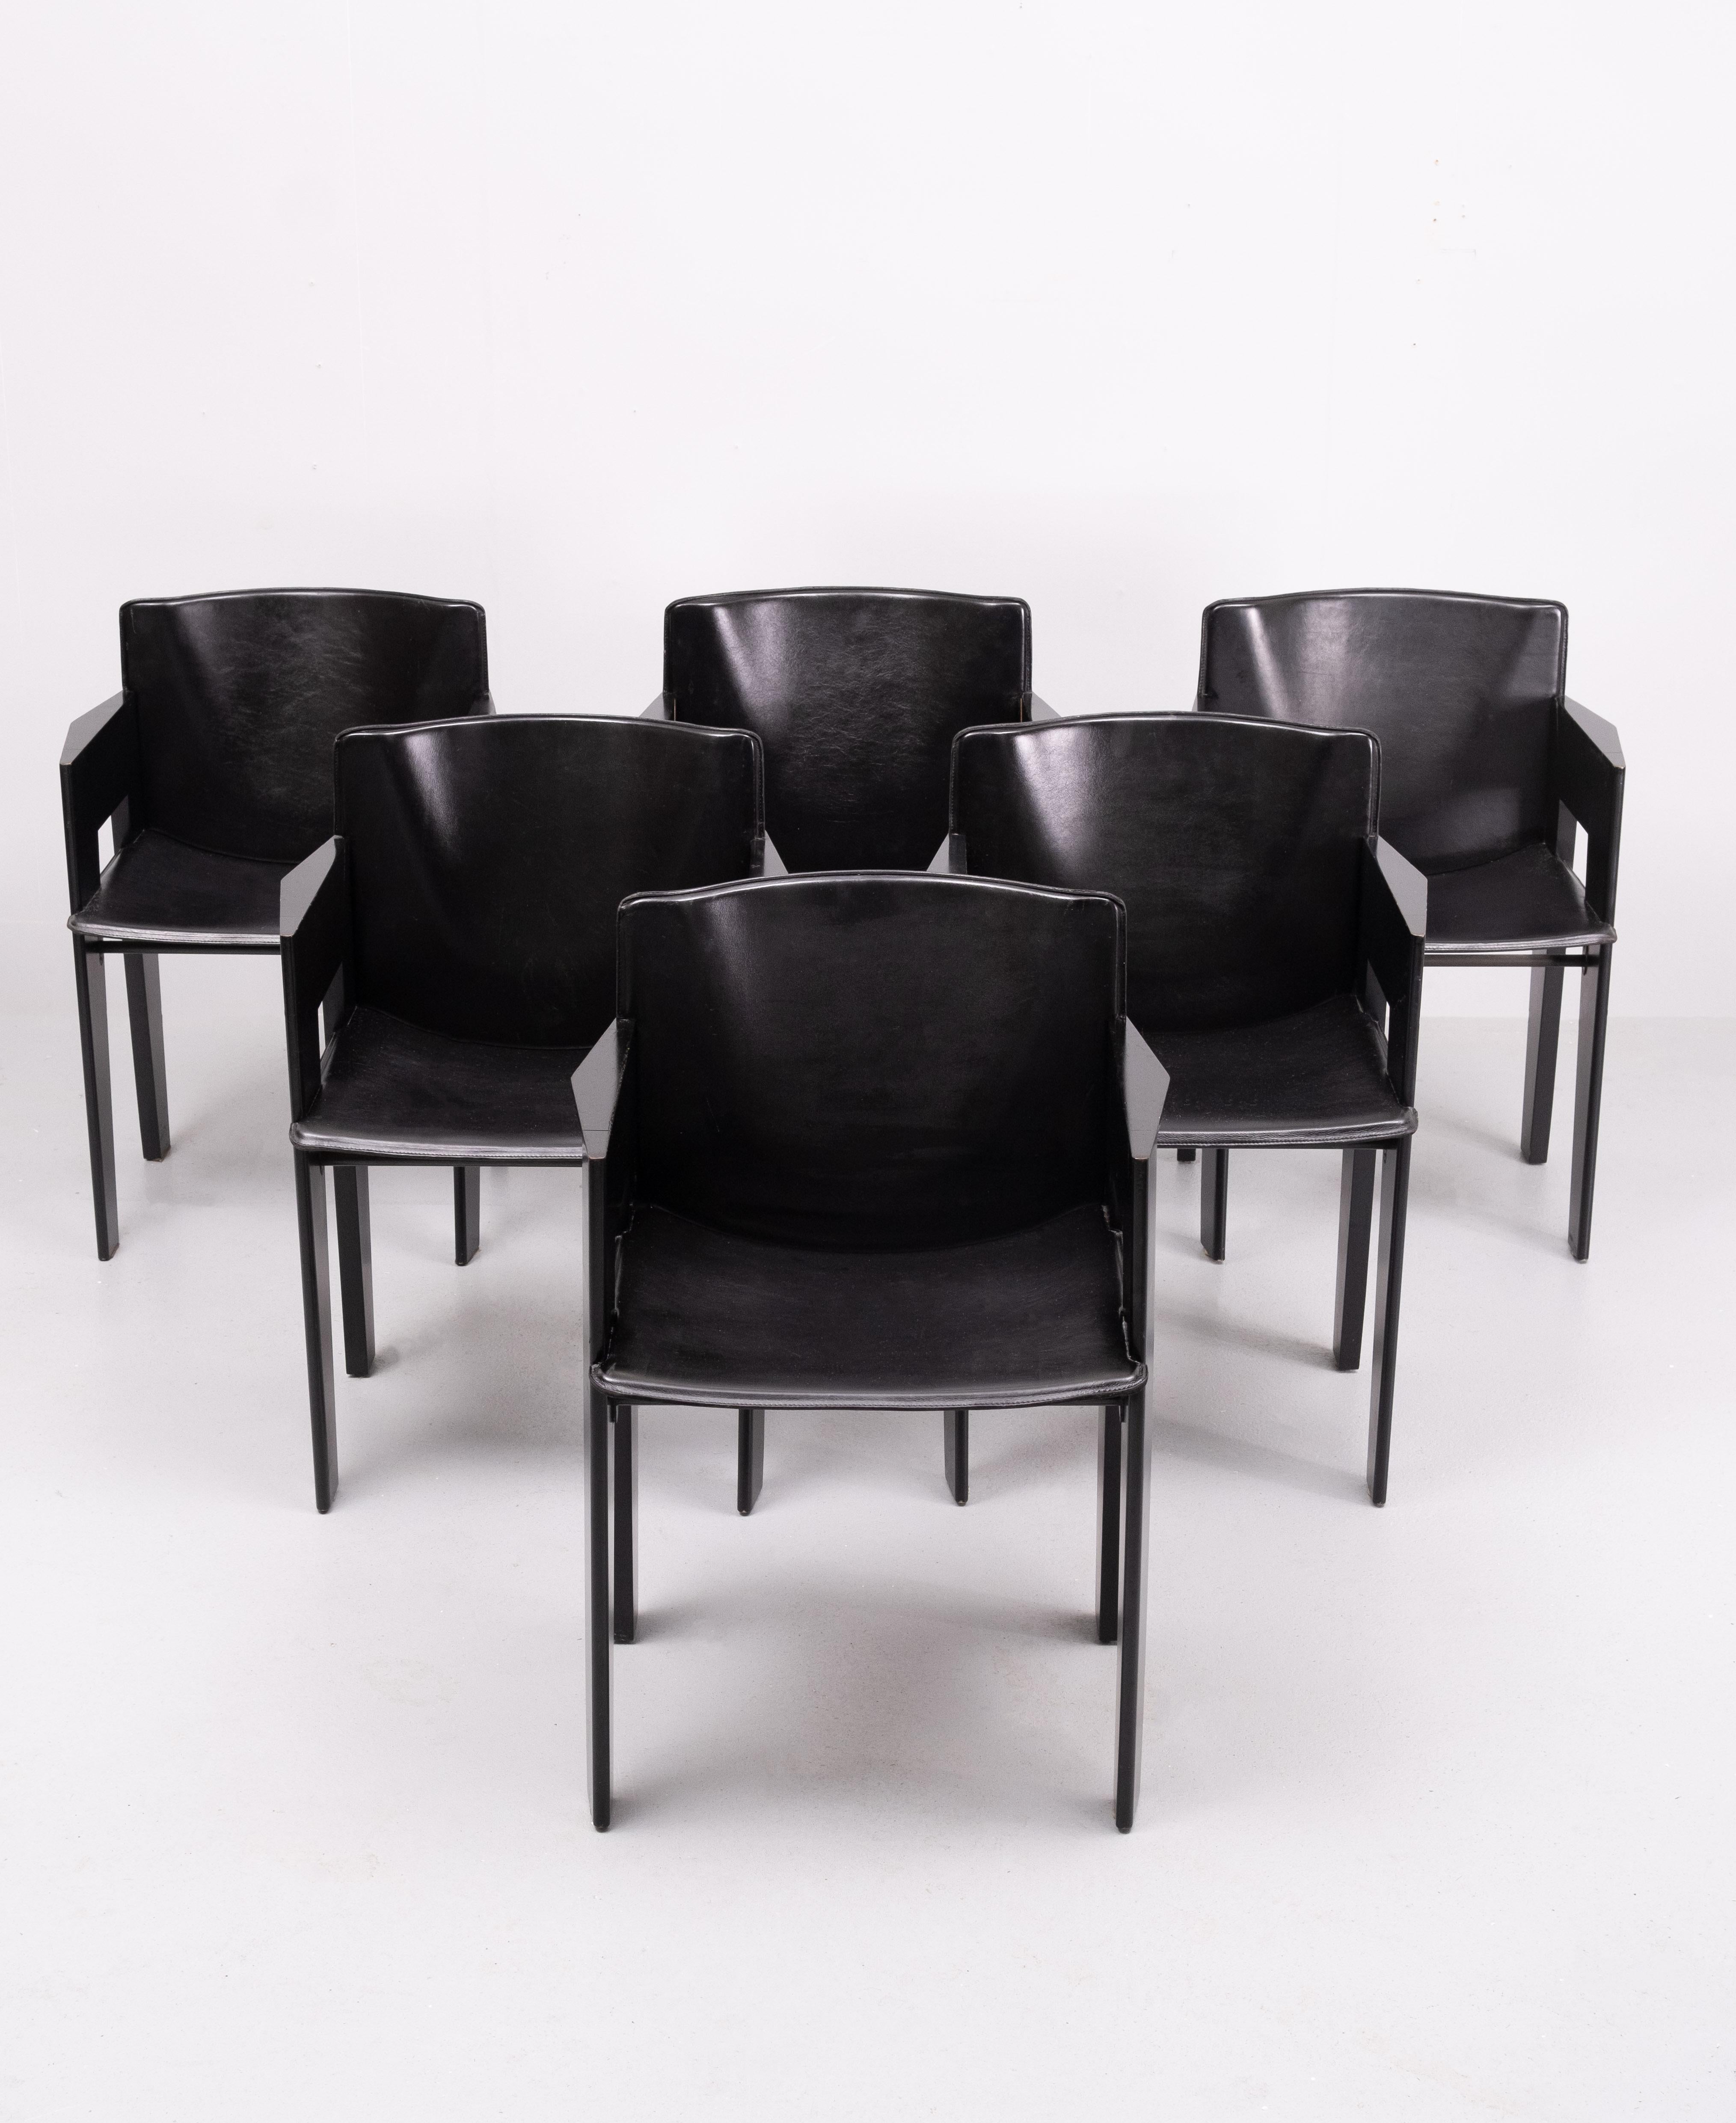 Late 20th Century 6 Leather & Wood Dining Chairs by Arnold Merckx for Arco, c.1980 For Sale